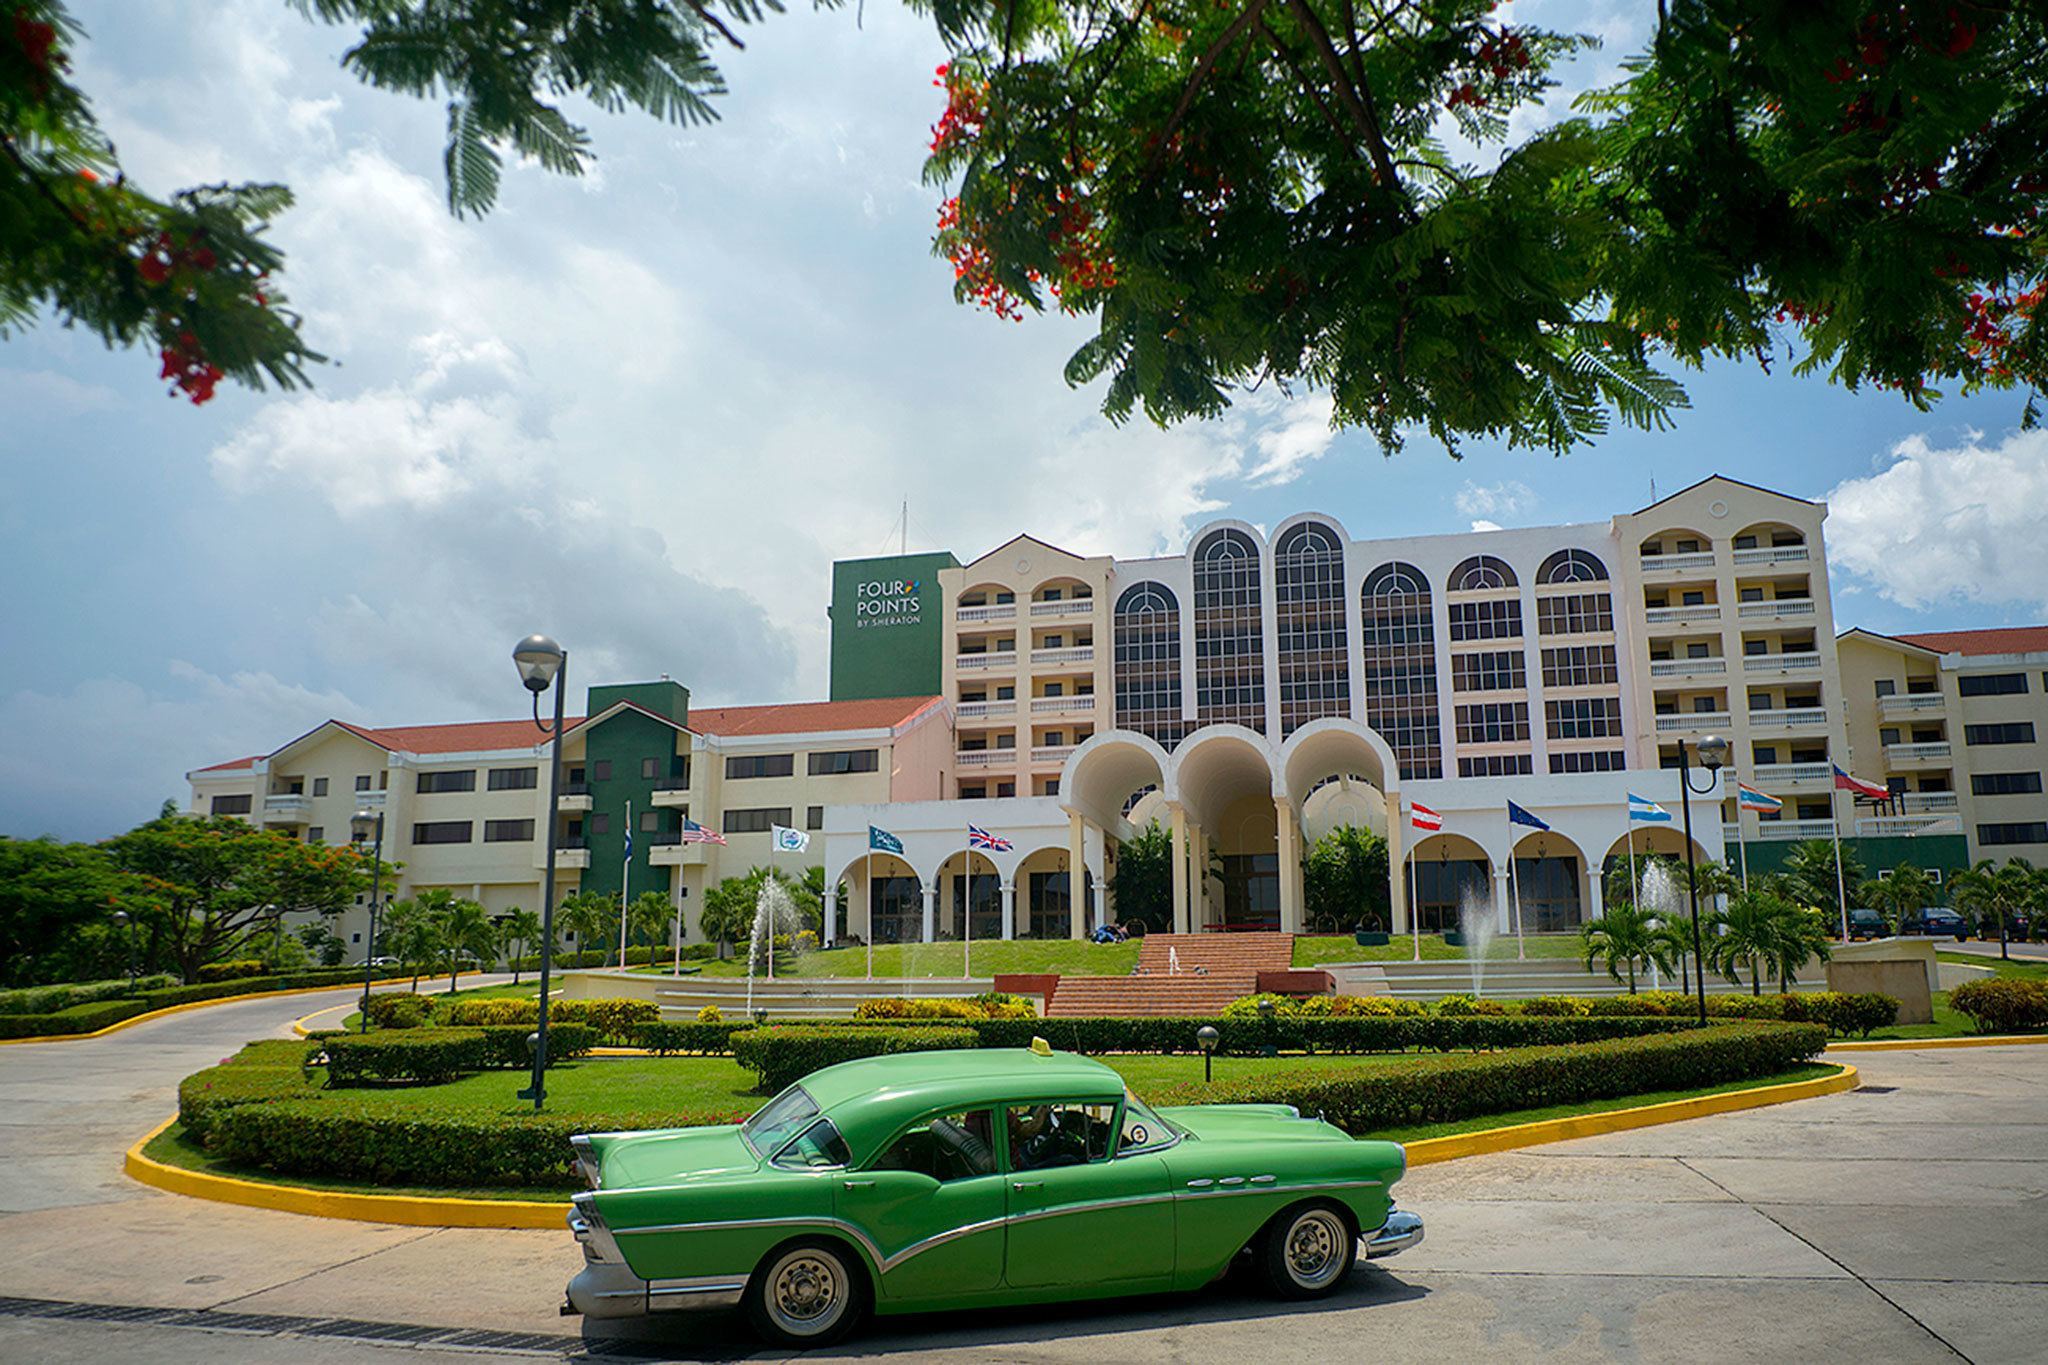 A vintage car passes in front of the Four Points by Sheraton hotel in Havana on Tuesday. American hotel giant Starwood has begun managing this hotel run by the Cuban military. (Associated Press / Ramon Espinosa)